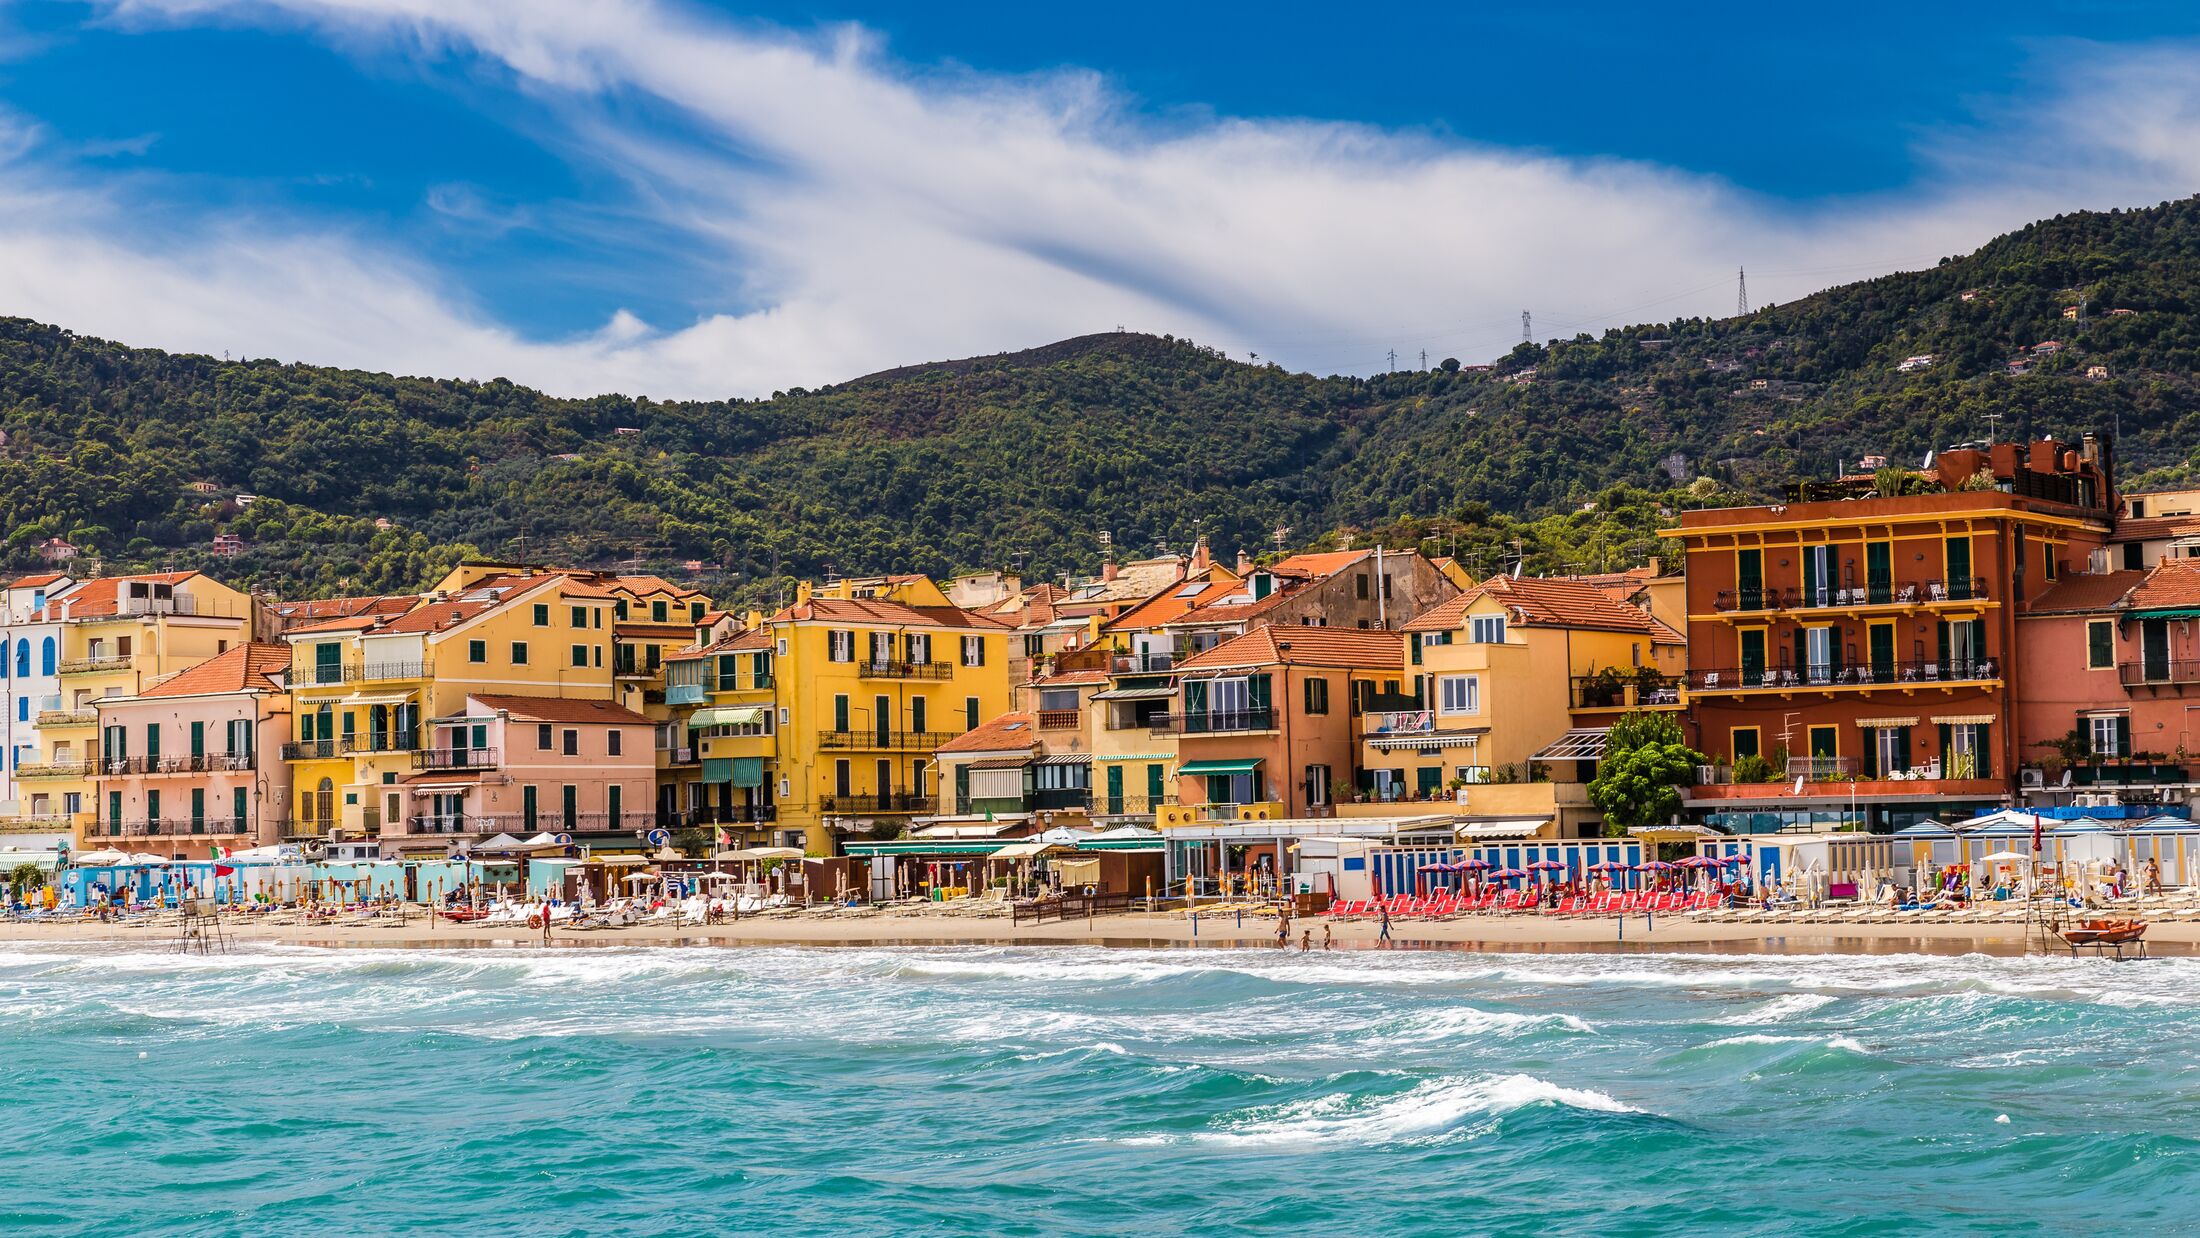 Beautiful View of Sea and Town of Alassio With Colorful Buildings During Summer Day-Alassio,Italy,Europe